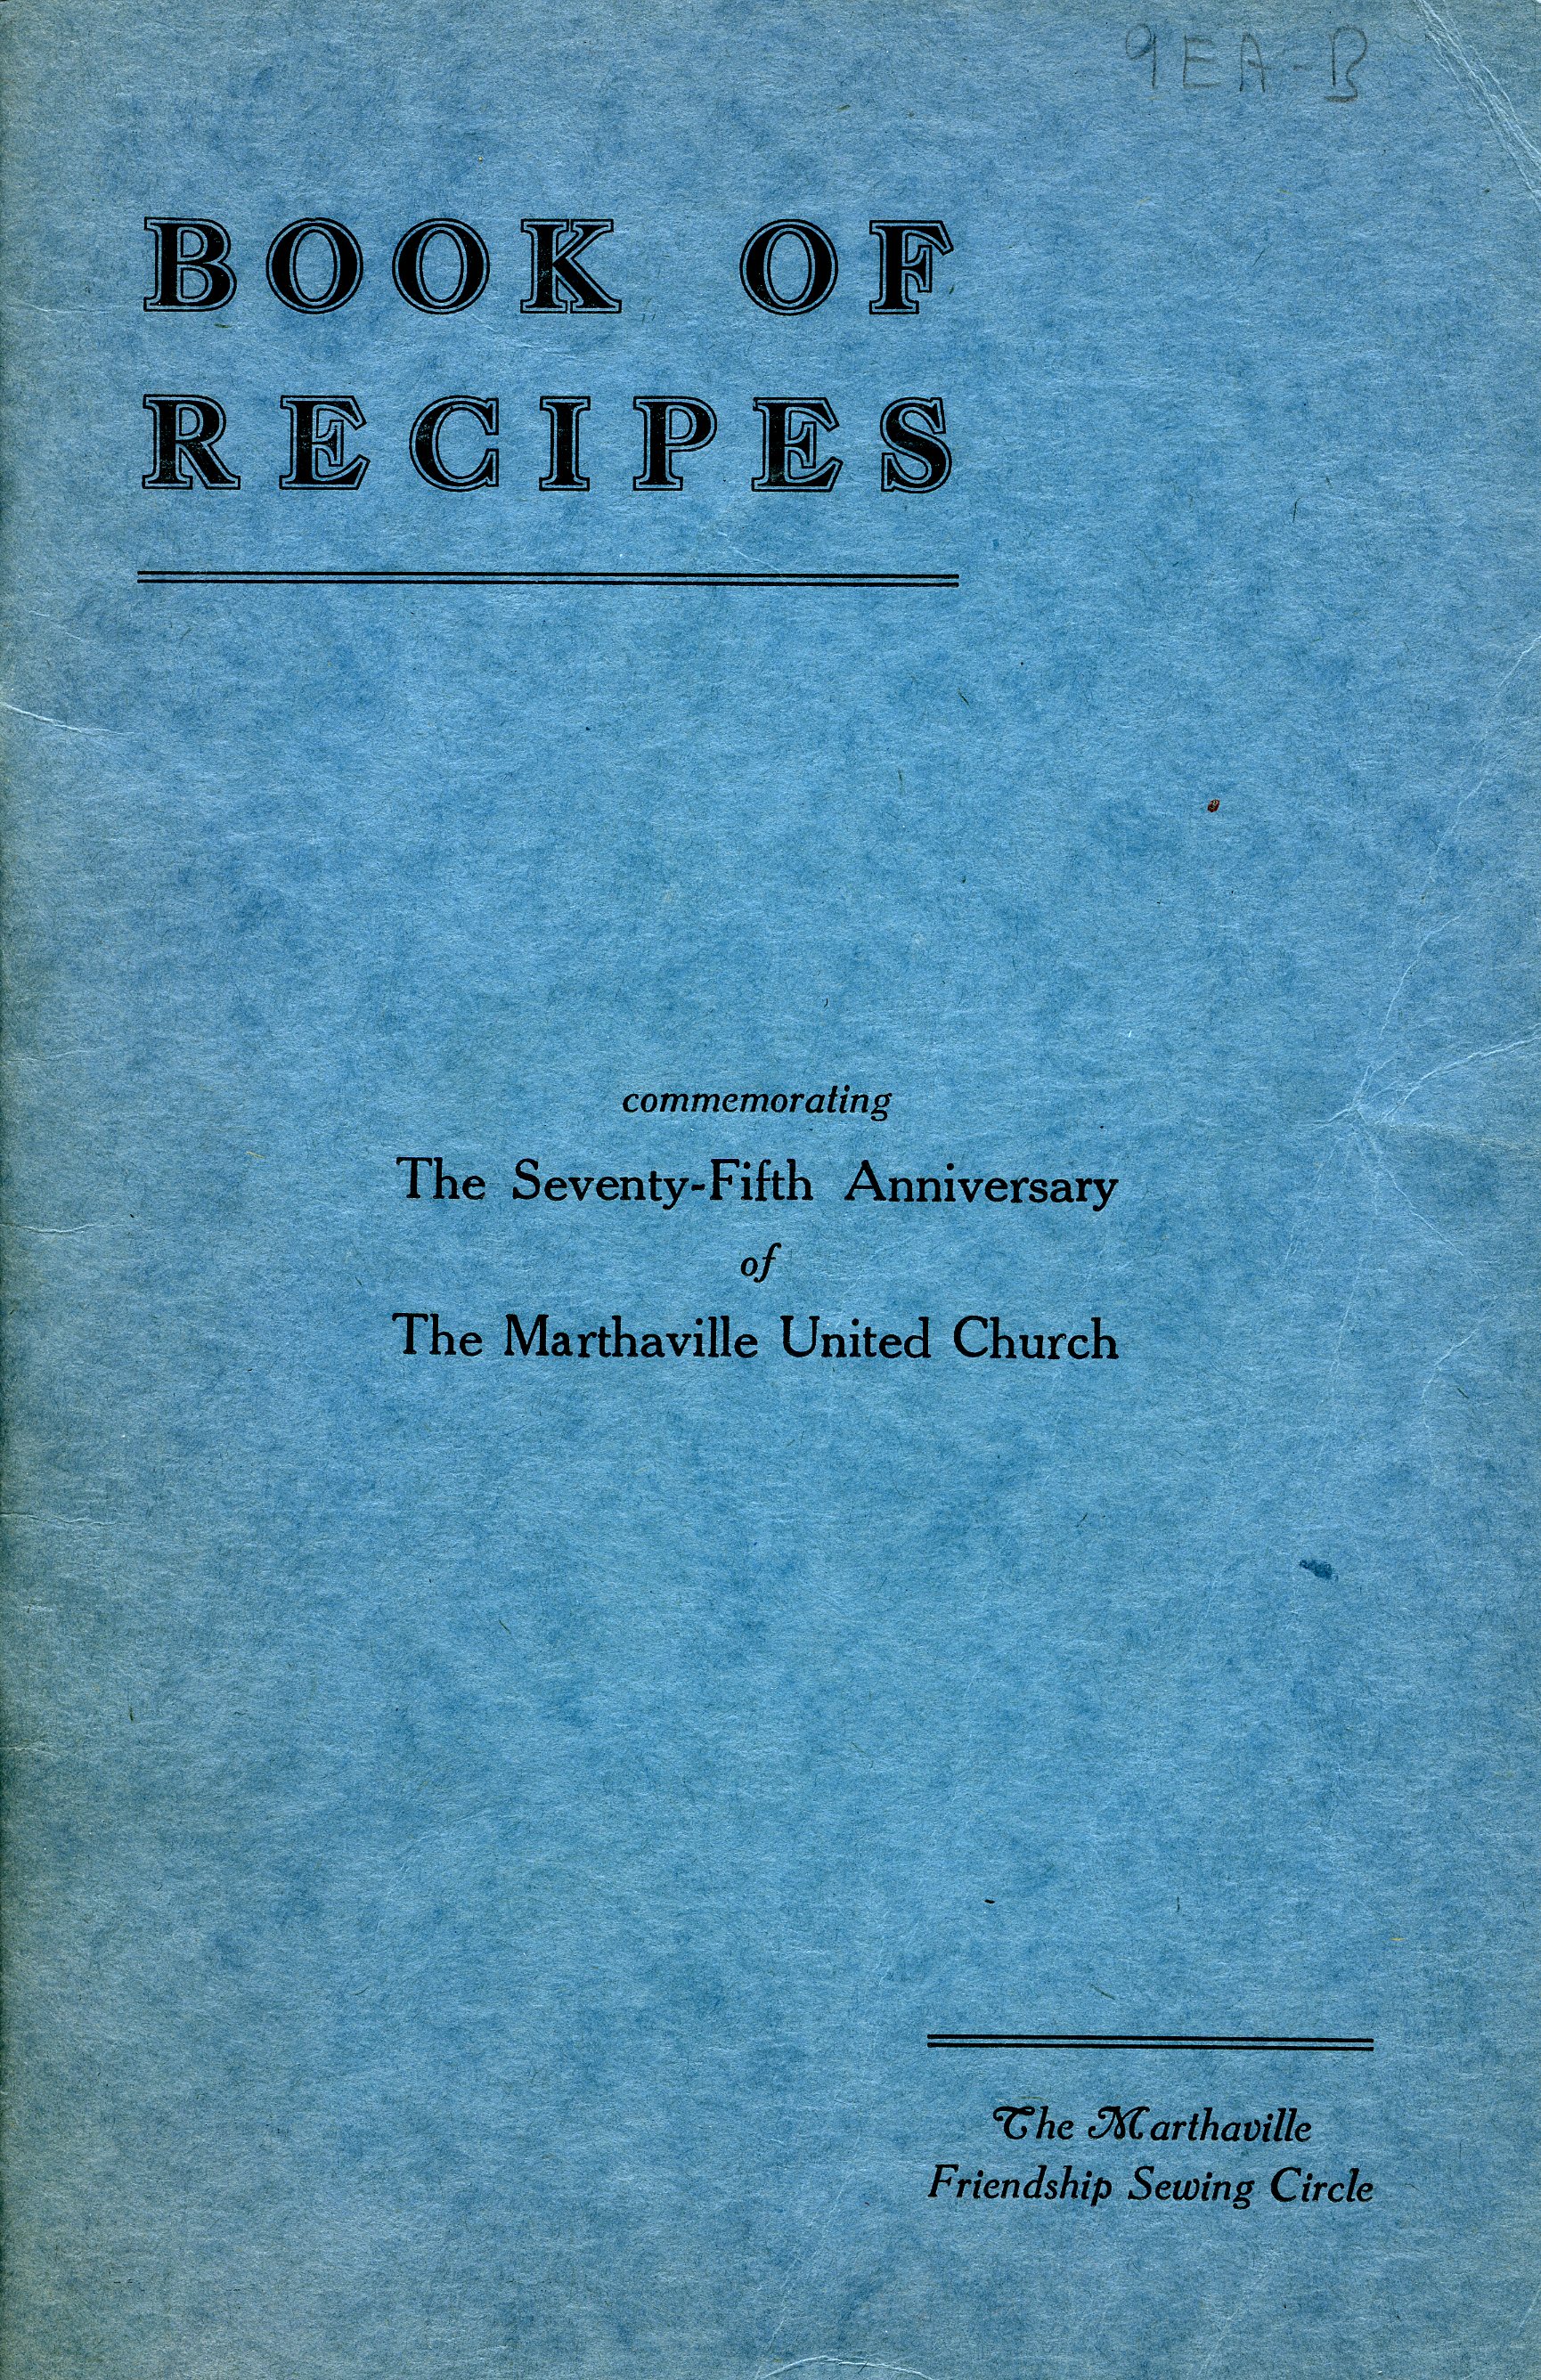 Cover of, "Book of Recipes".